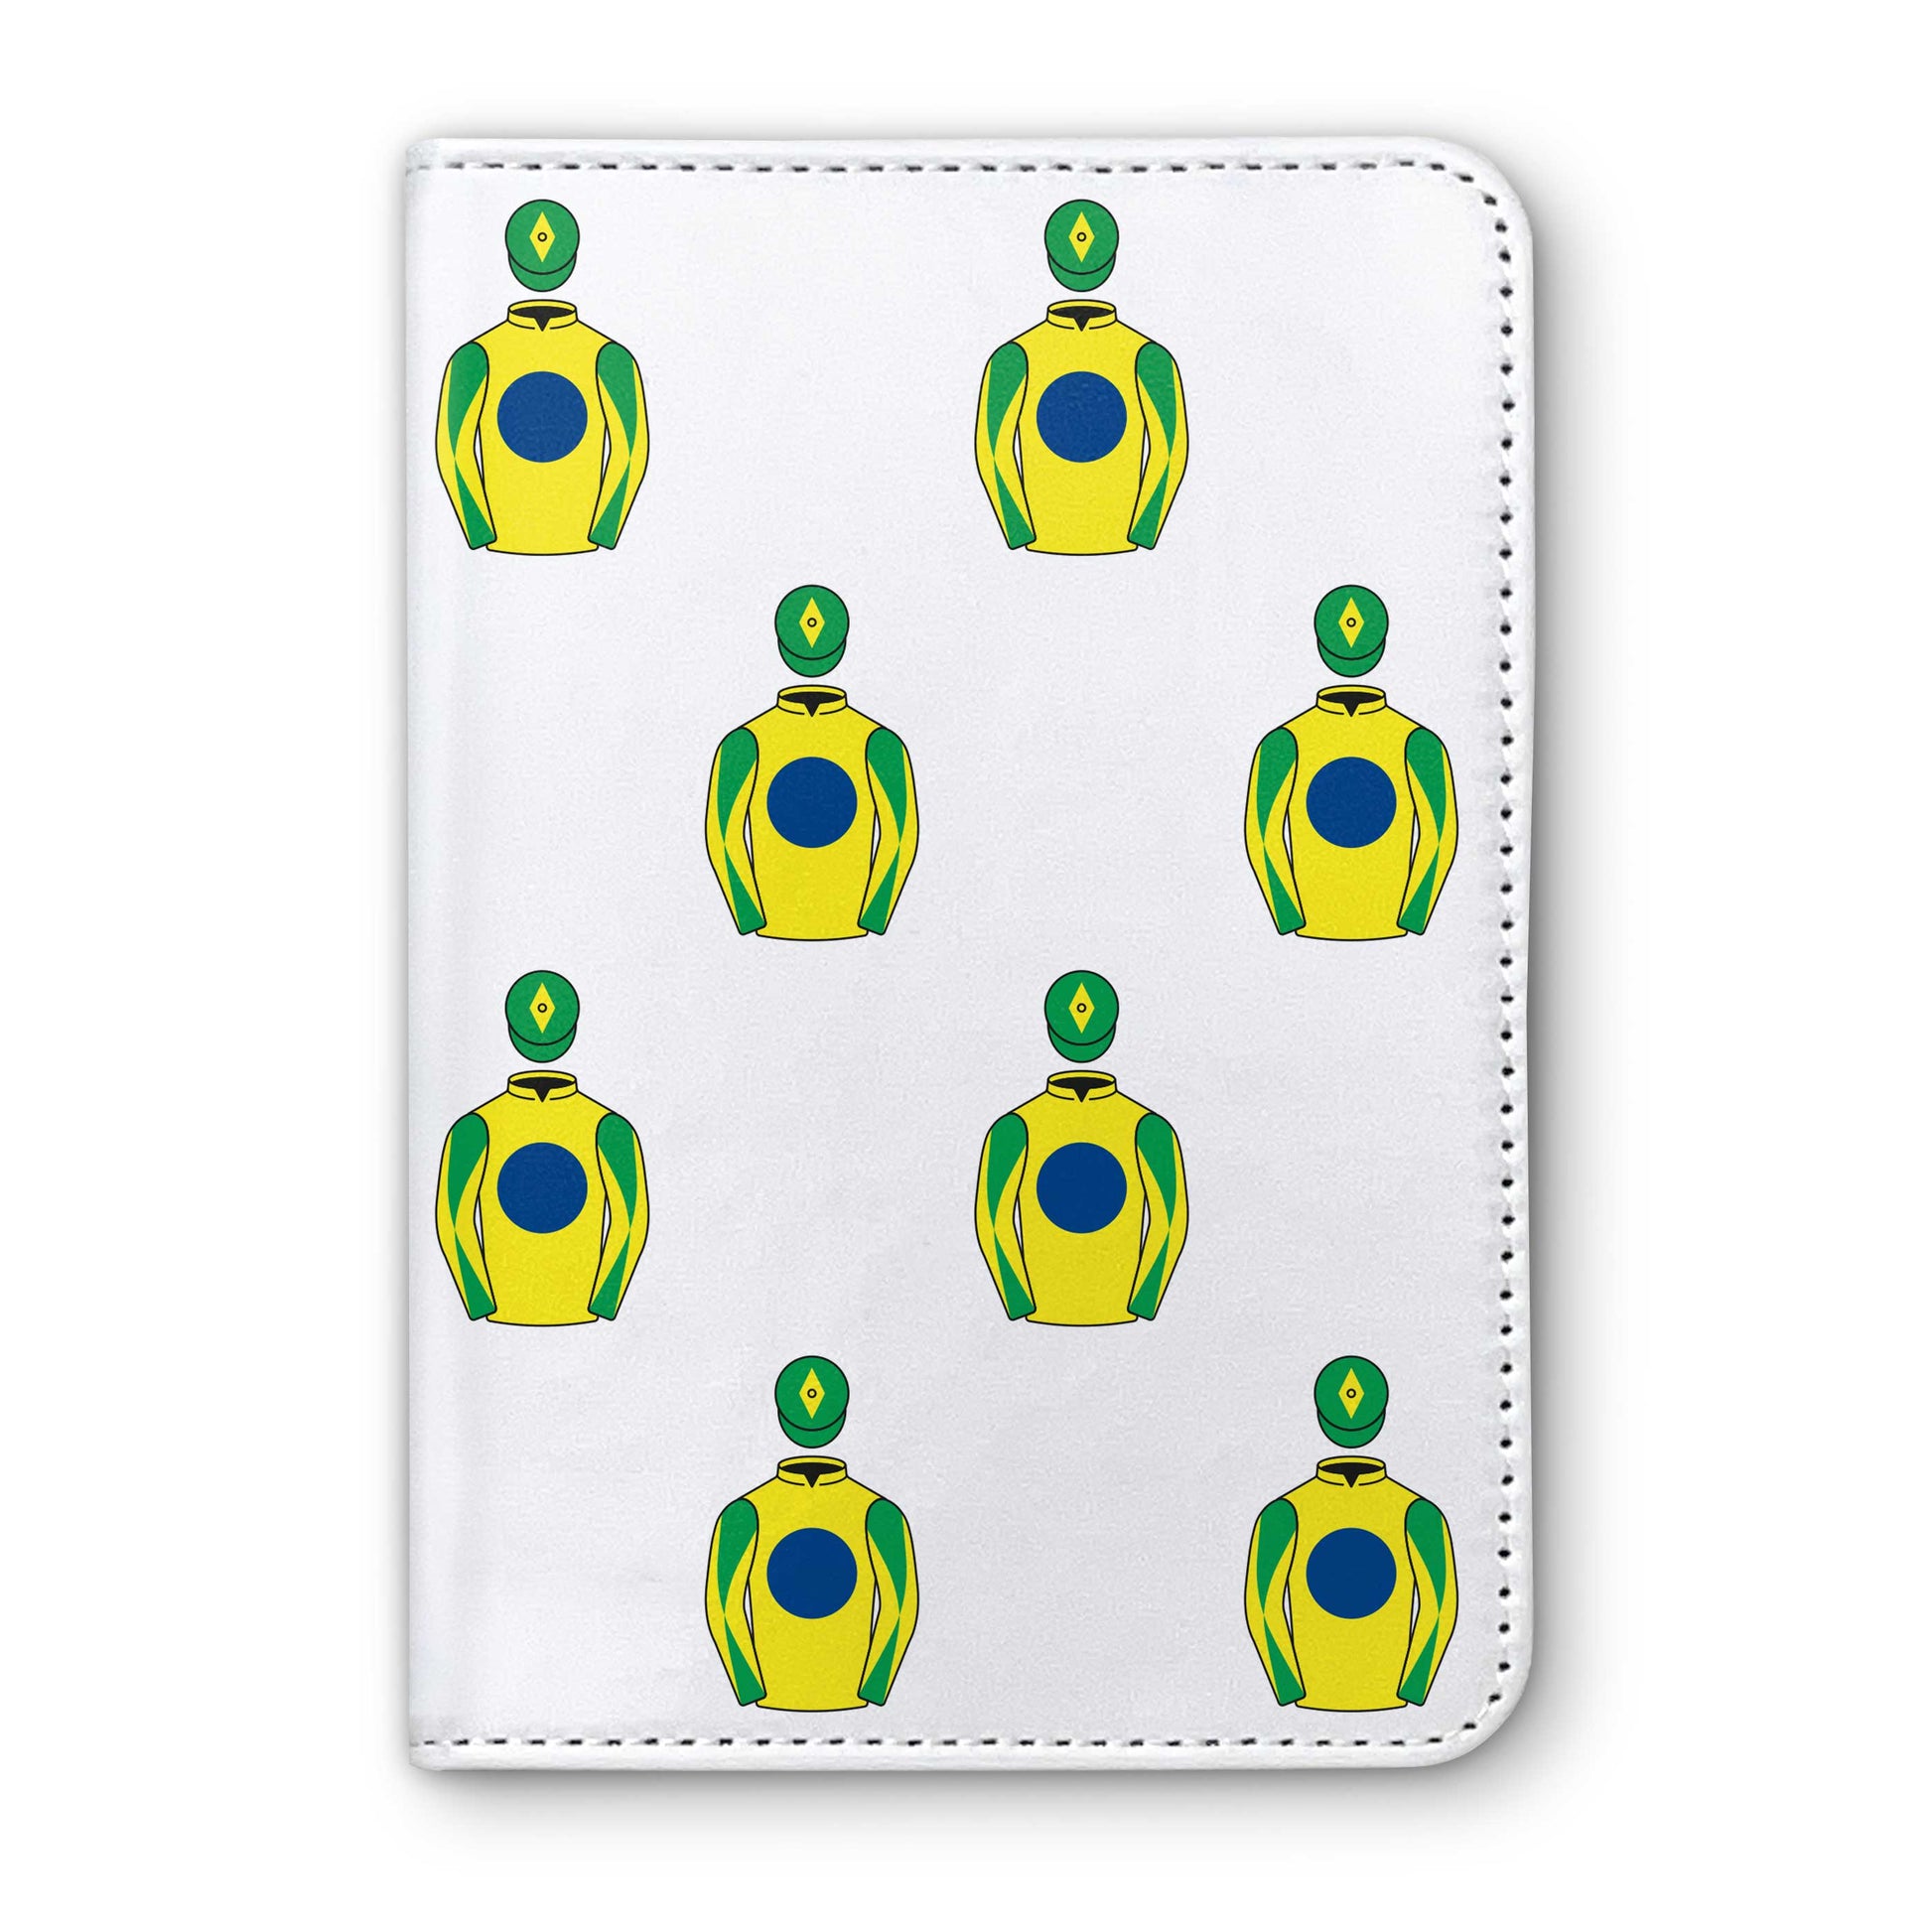 Rio Gold Racing Club Horse Racing Passport Holder - Hacked Up Horse Racing Gifts